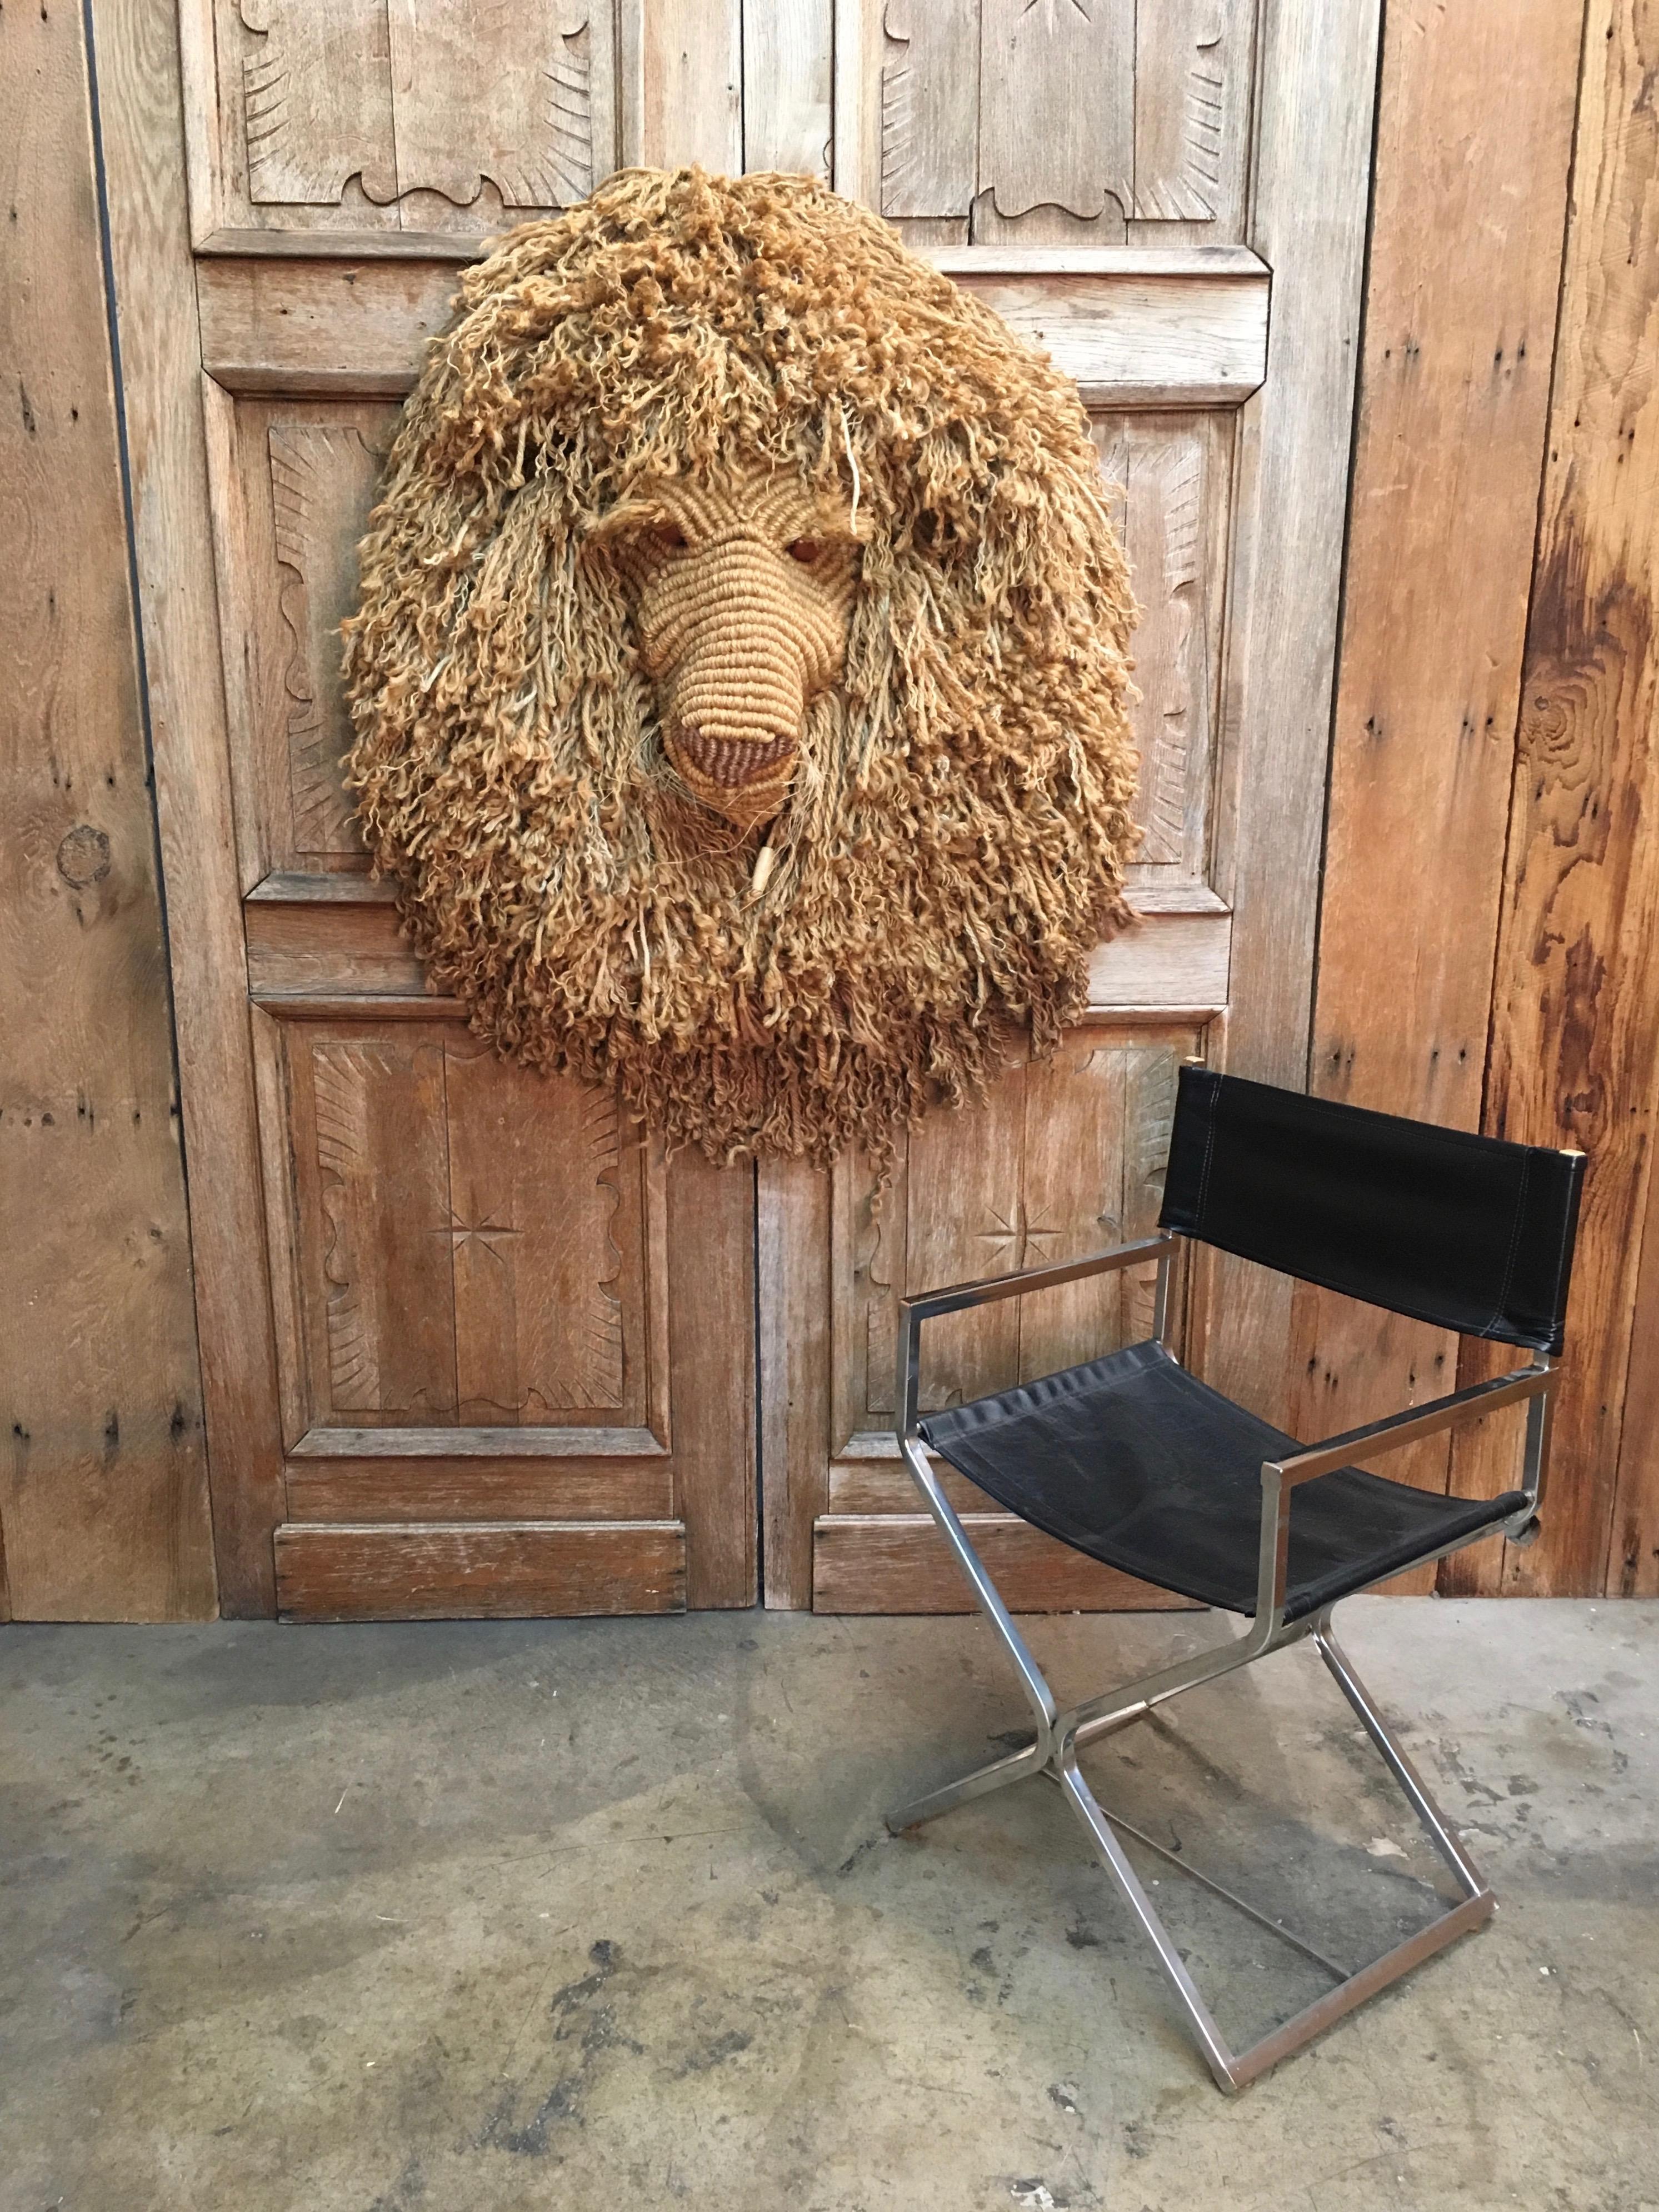 This is number 4 out of 50 of these made in 1982, Beautiful woven abstract lion head on a steel frame with wood eyeballs by Judee Du Bourdieu
Signed and dated please see pictures.